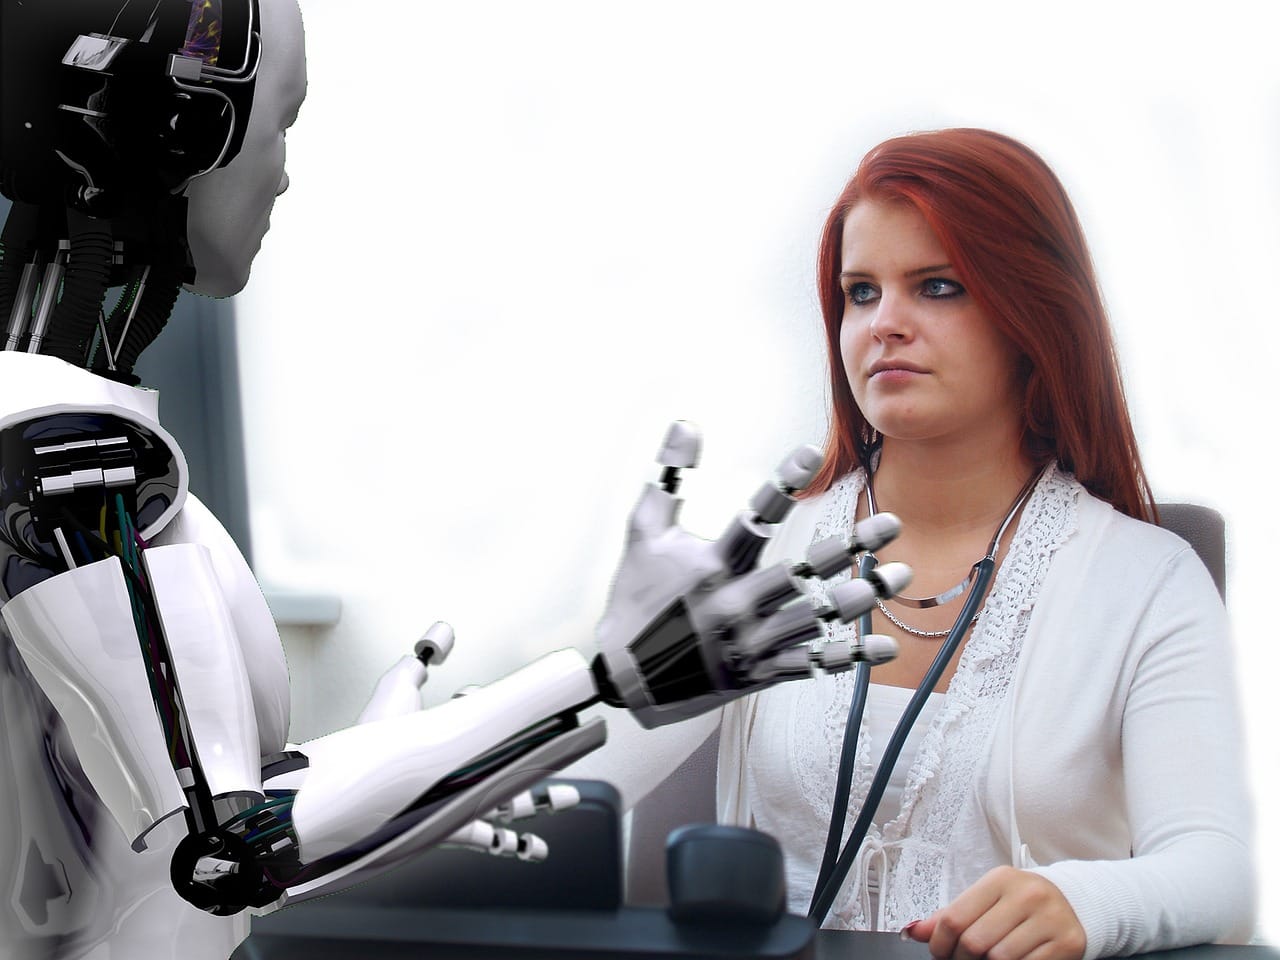 AI robot and a doctor working together